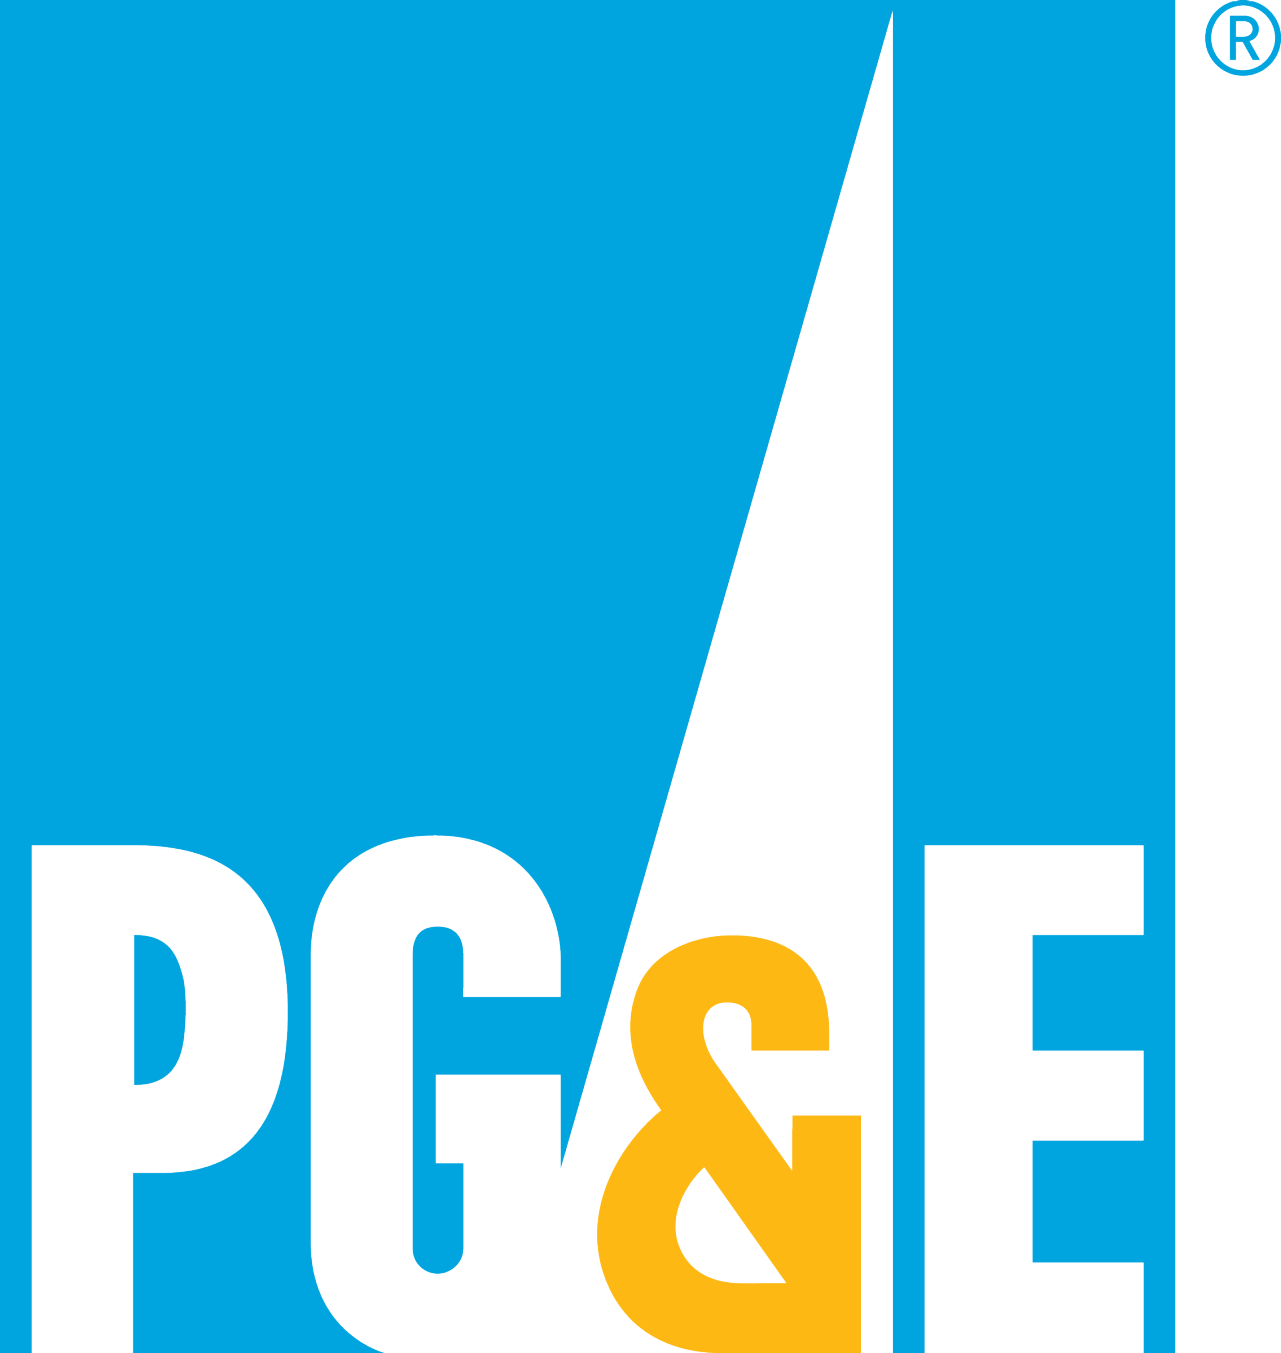 Pacific Gas and Electric Company logo